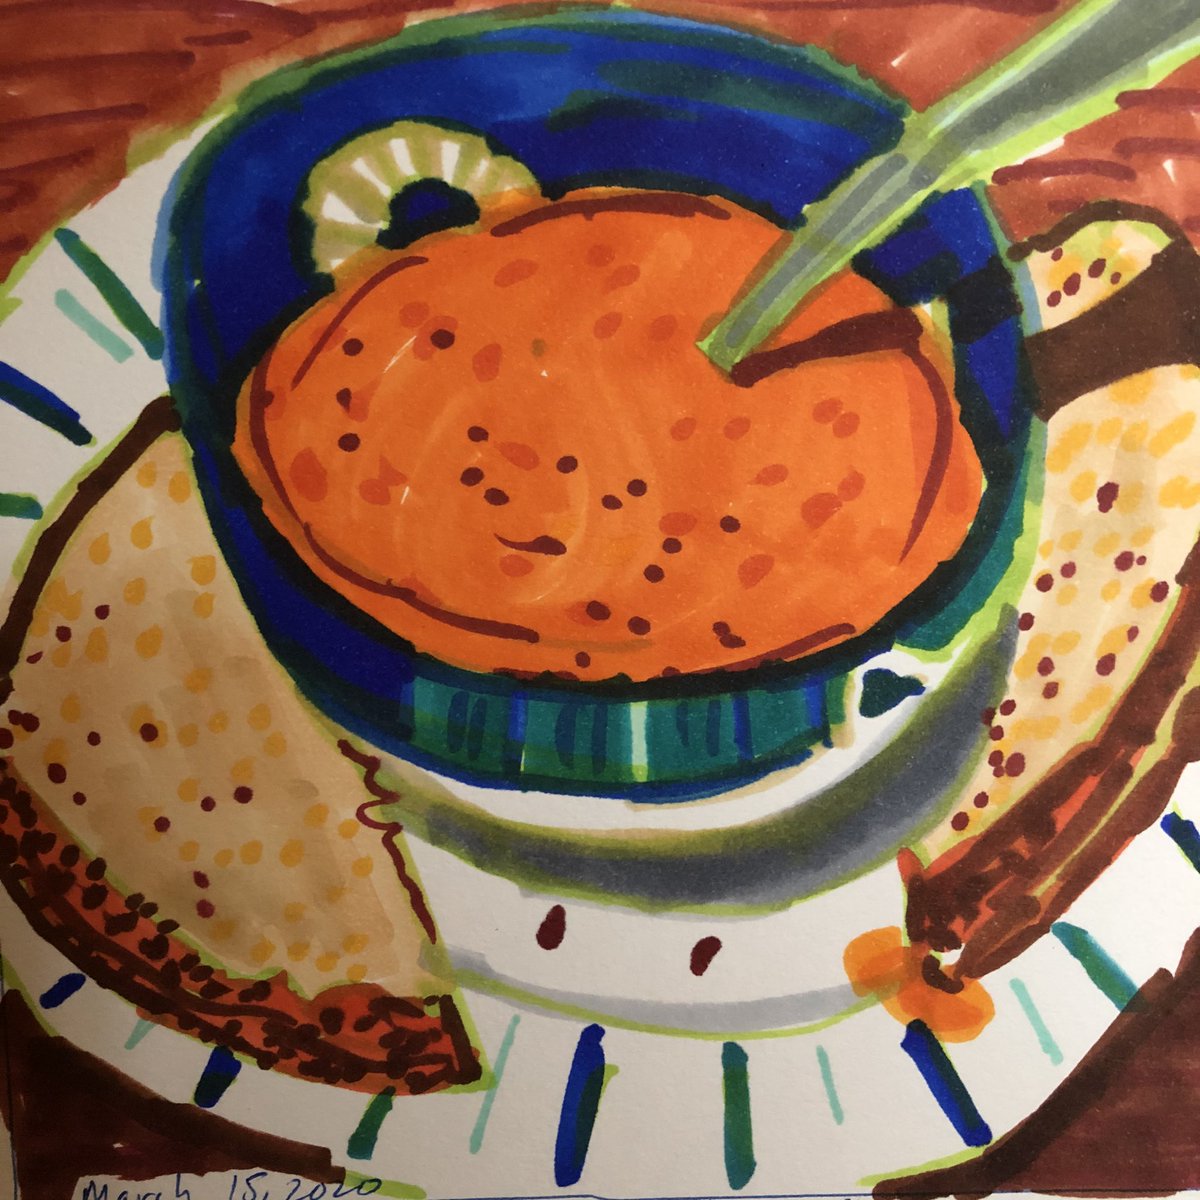 Grilled cheese and tomato soup no 3.  #art366